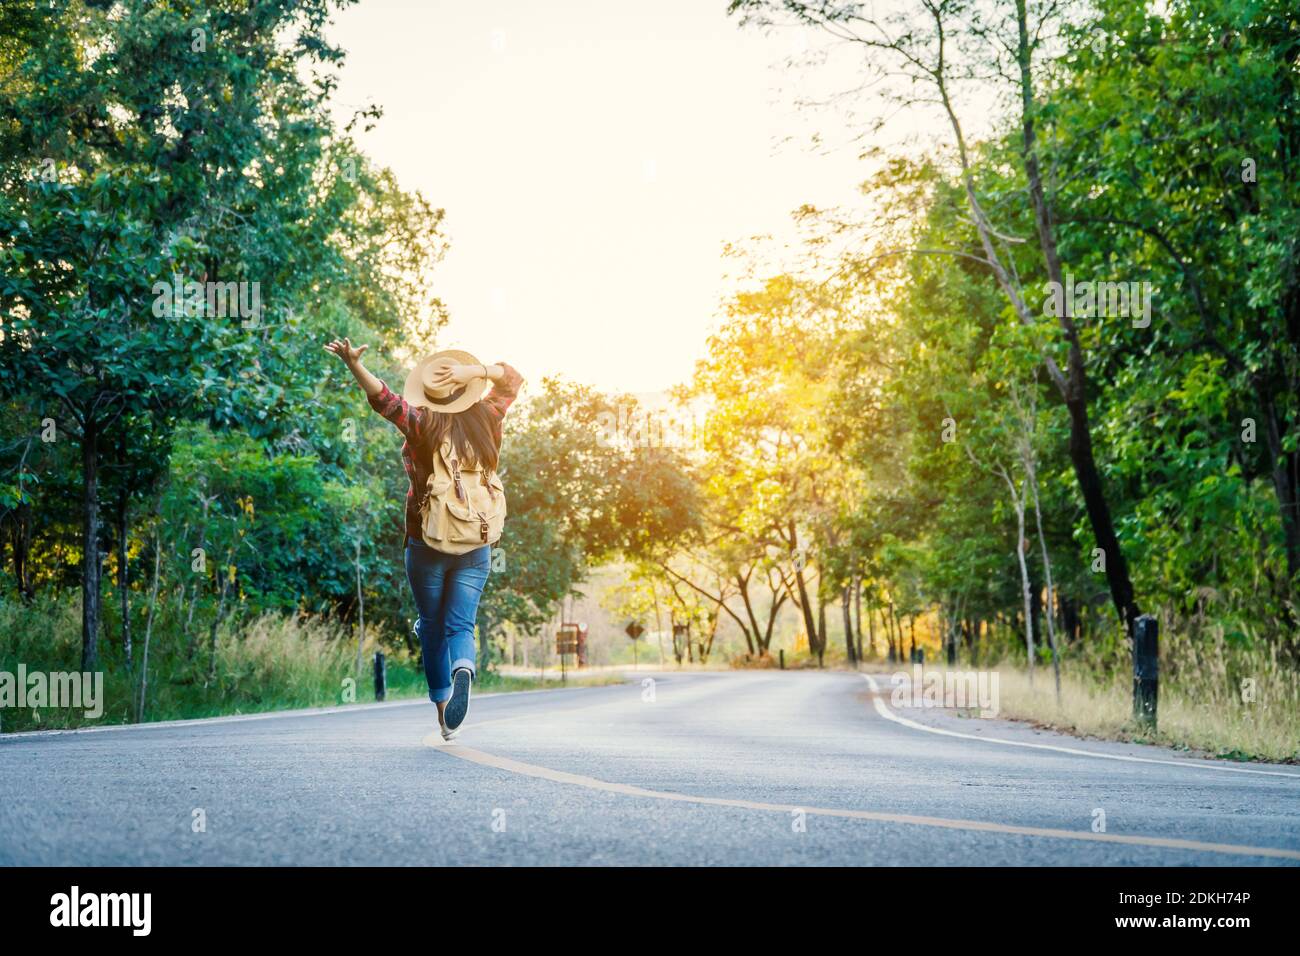 Rear View Of Woman Walking On Road Amidst Trees Stock Photo